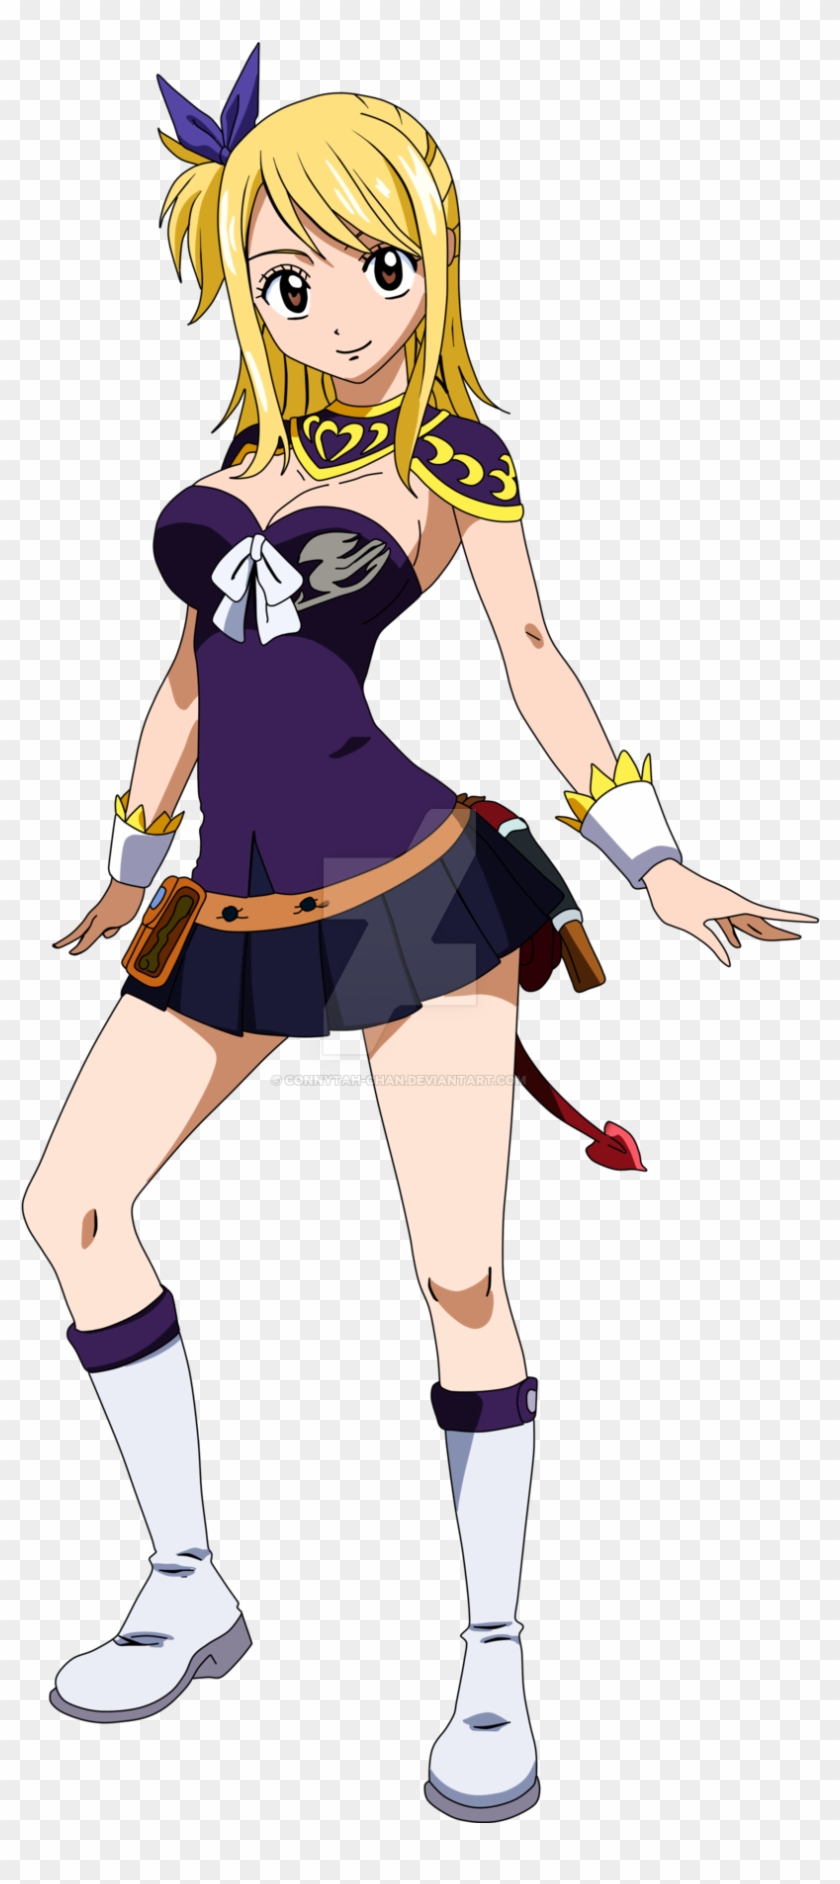 Http Img02 Deviantart Heartfilia Render Png Fairy Tail Lucy Grand Magic Games Free Transparent Png Clipart Images Download